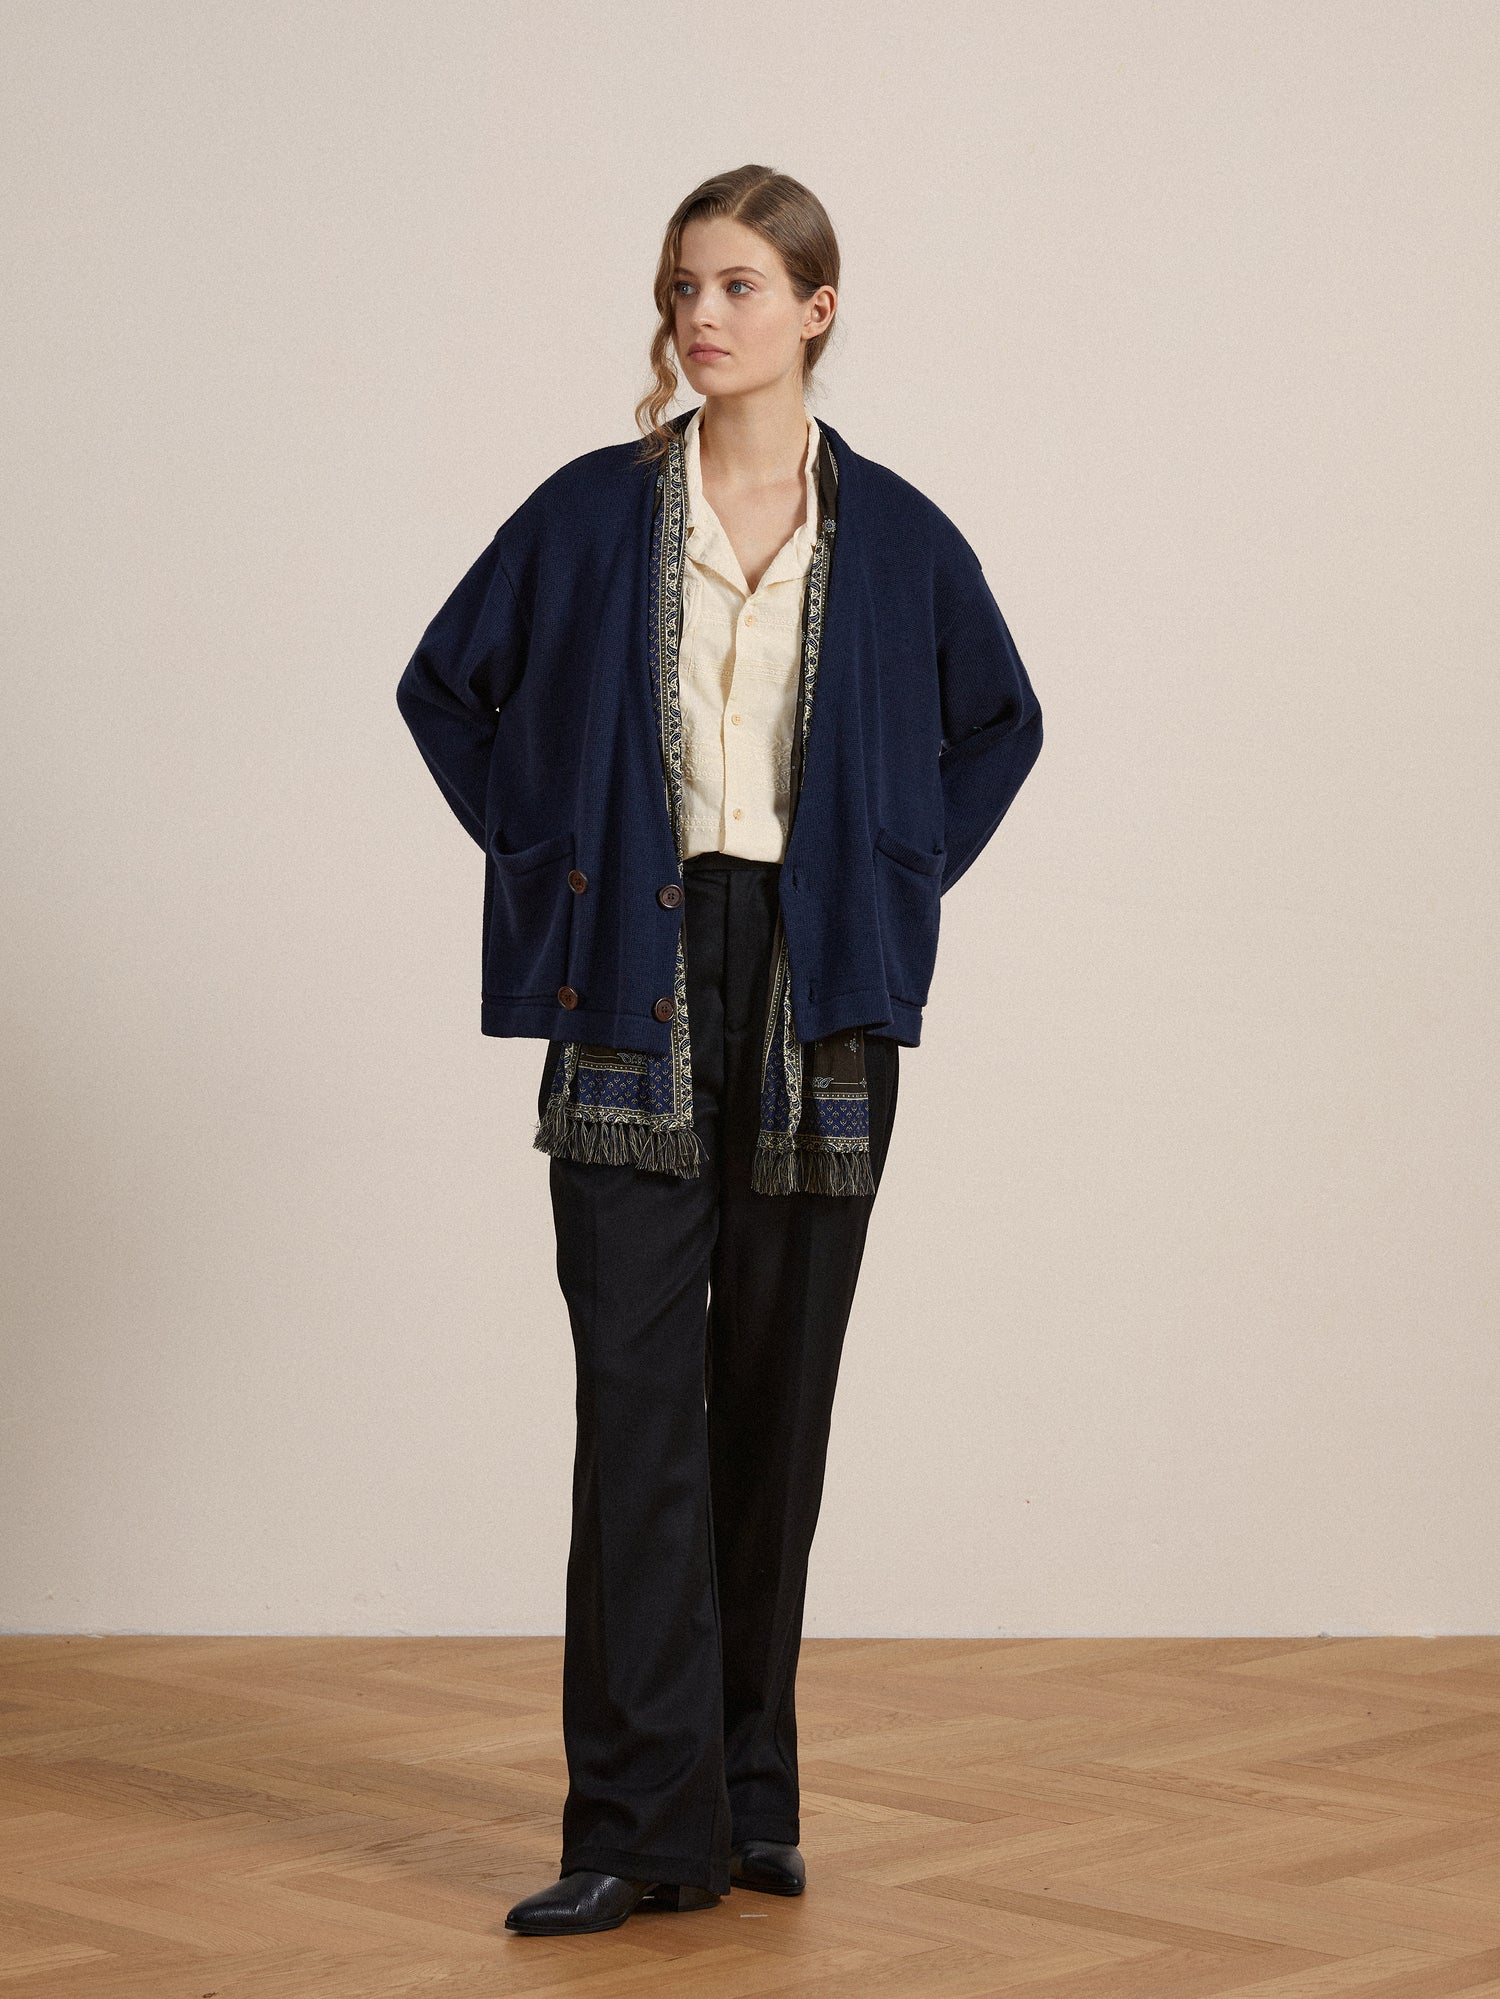 The model is wearing a Found Larsi Double Breasted Knit Cardigan and black pants.